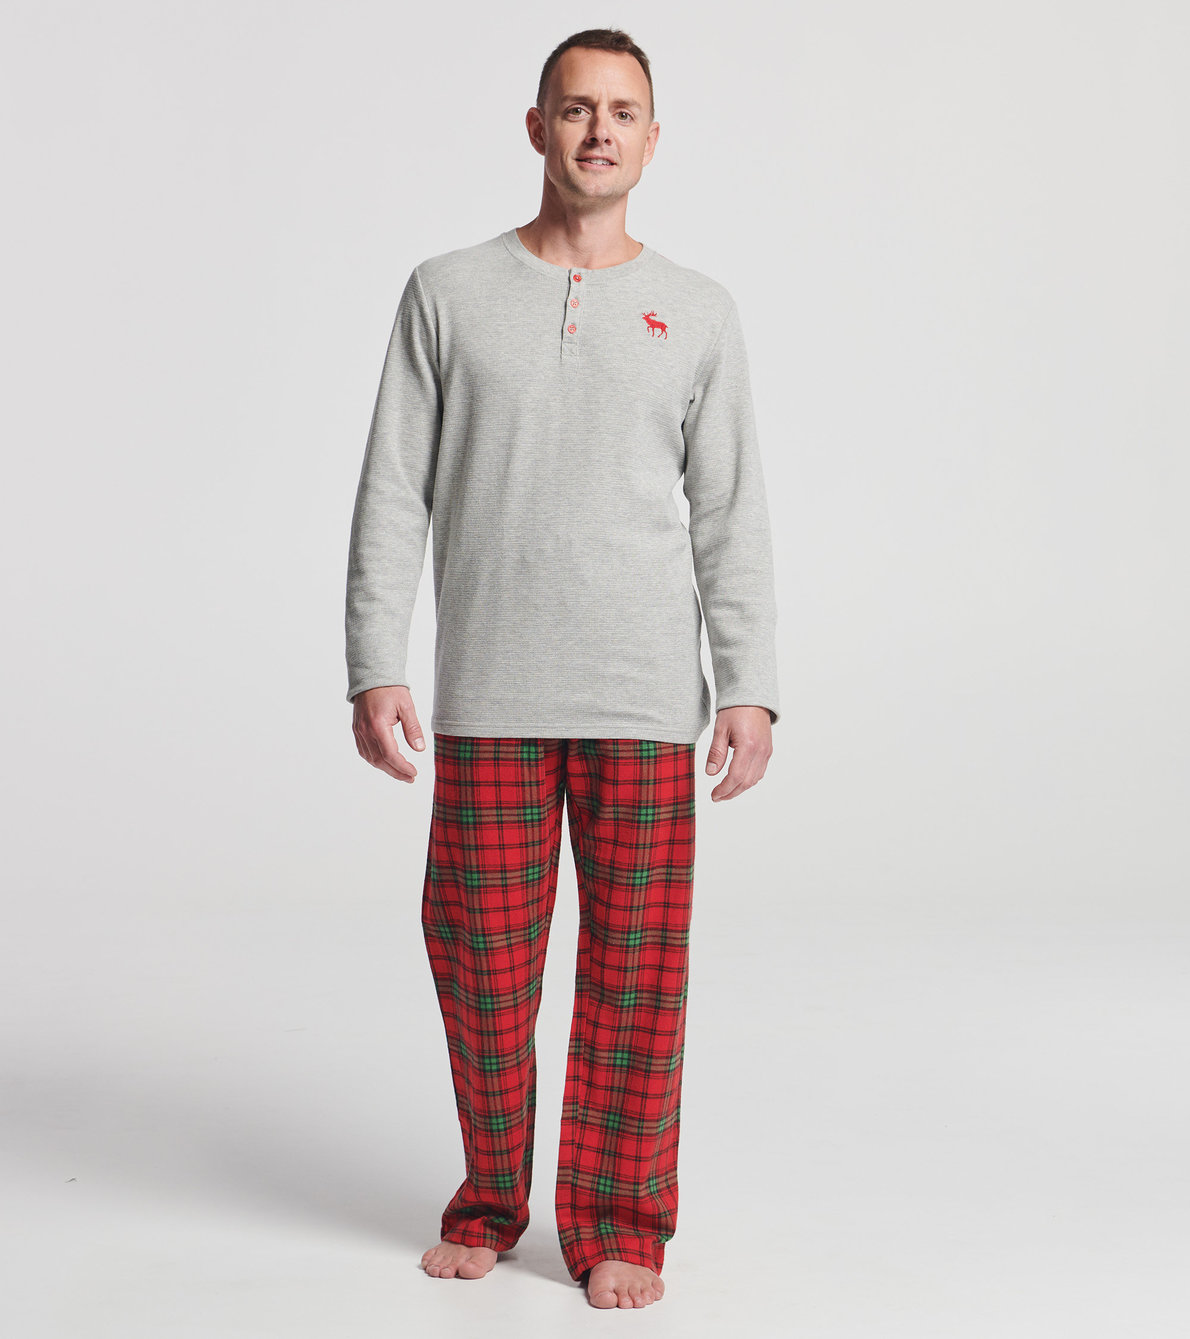 View larger image of Classic Holiday Men's Tee and Pants Pajama Separates